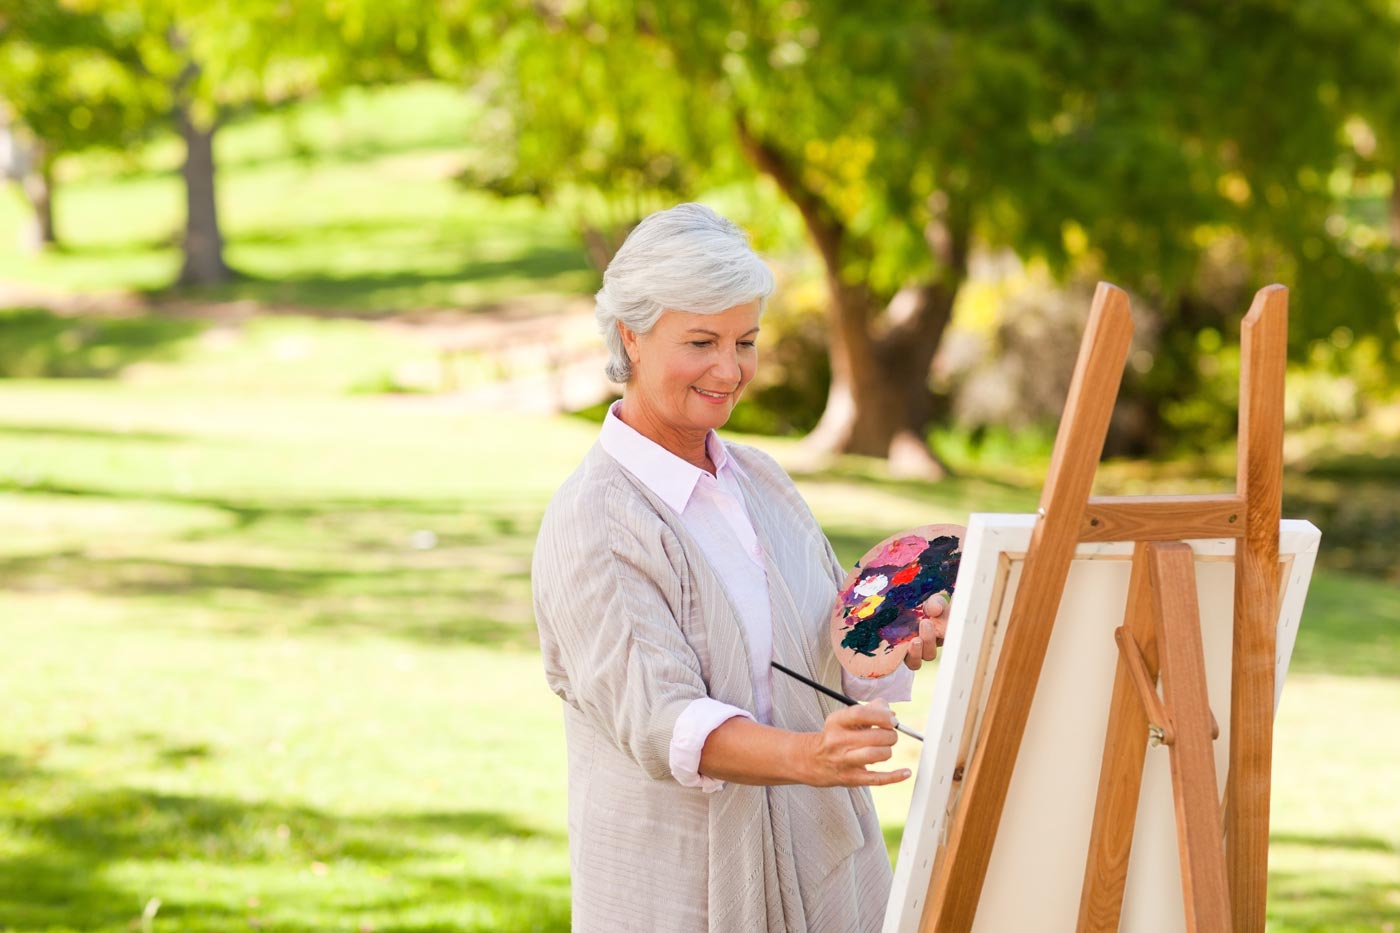 Proveer at Grande View | Senior woman painting outdoors